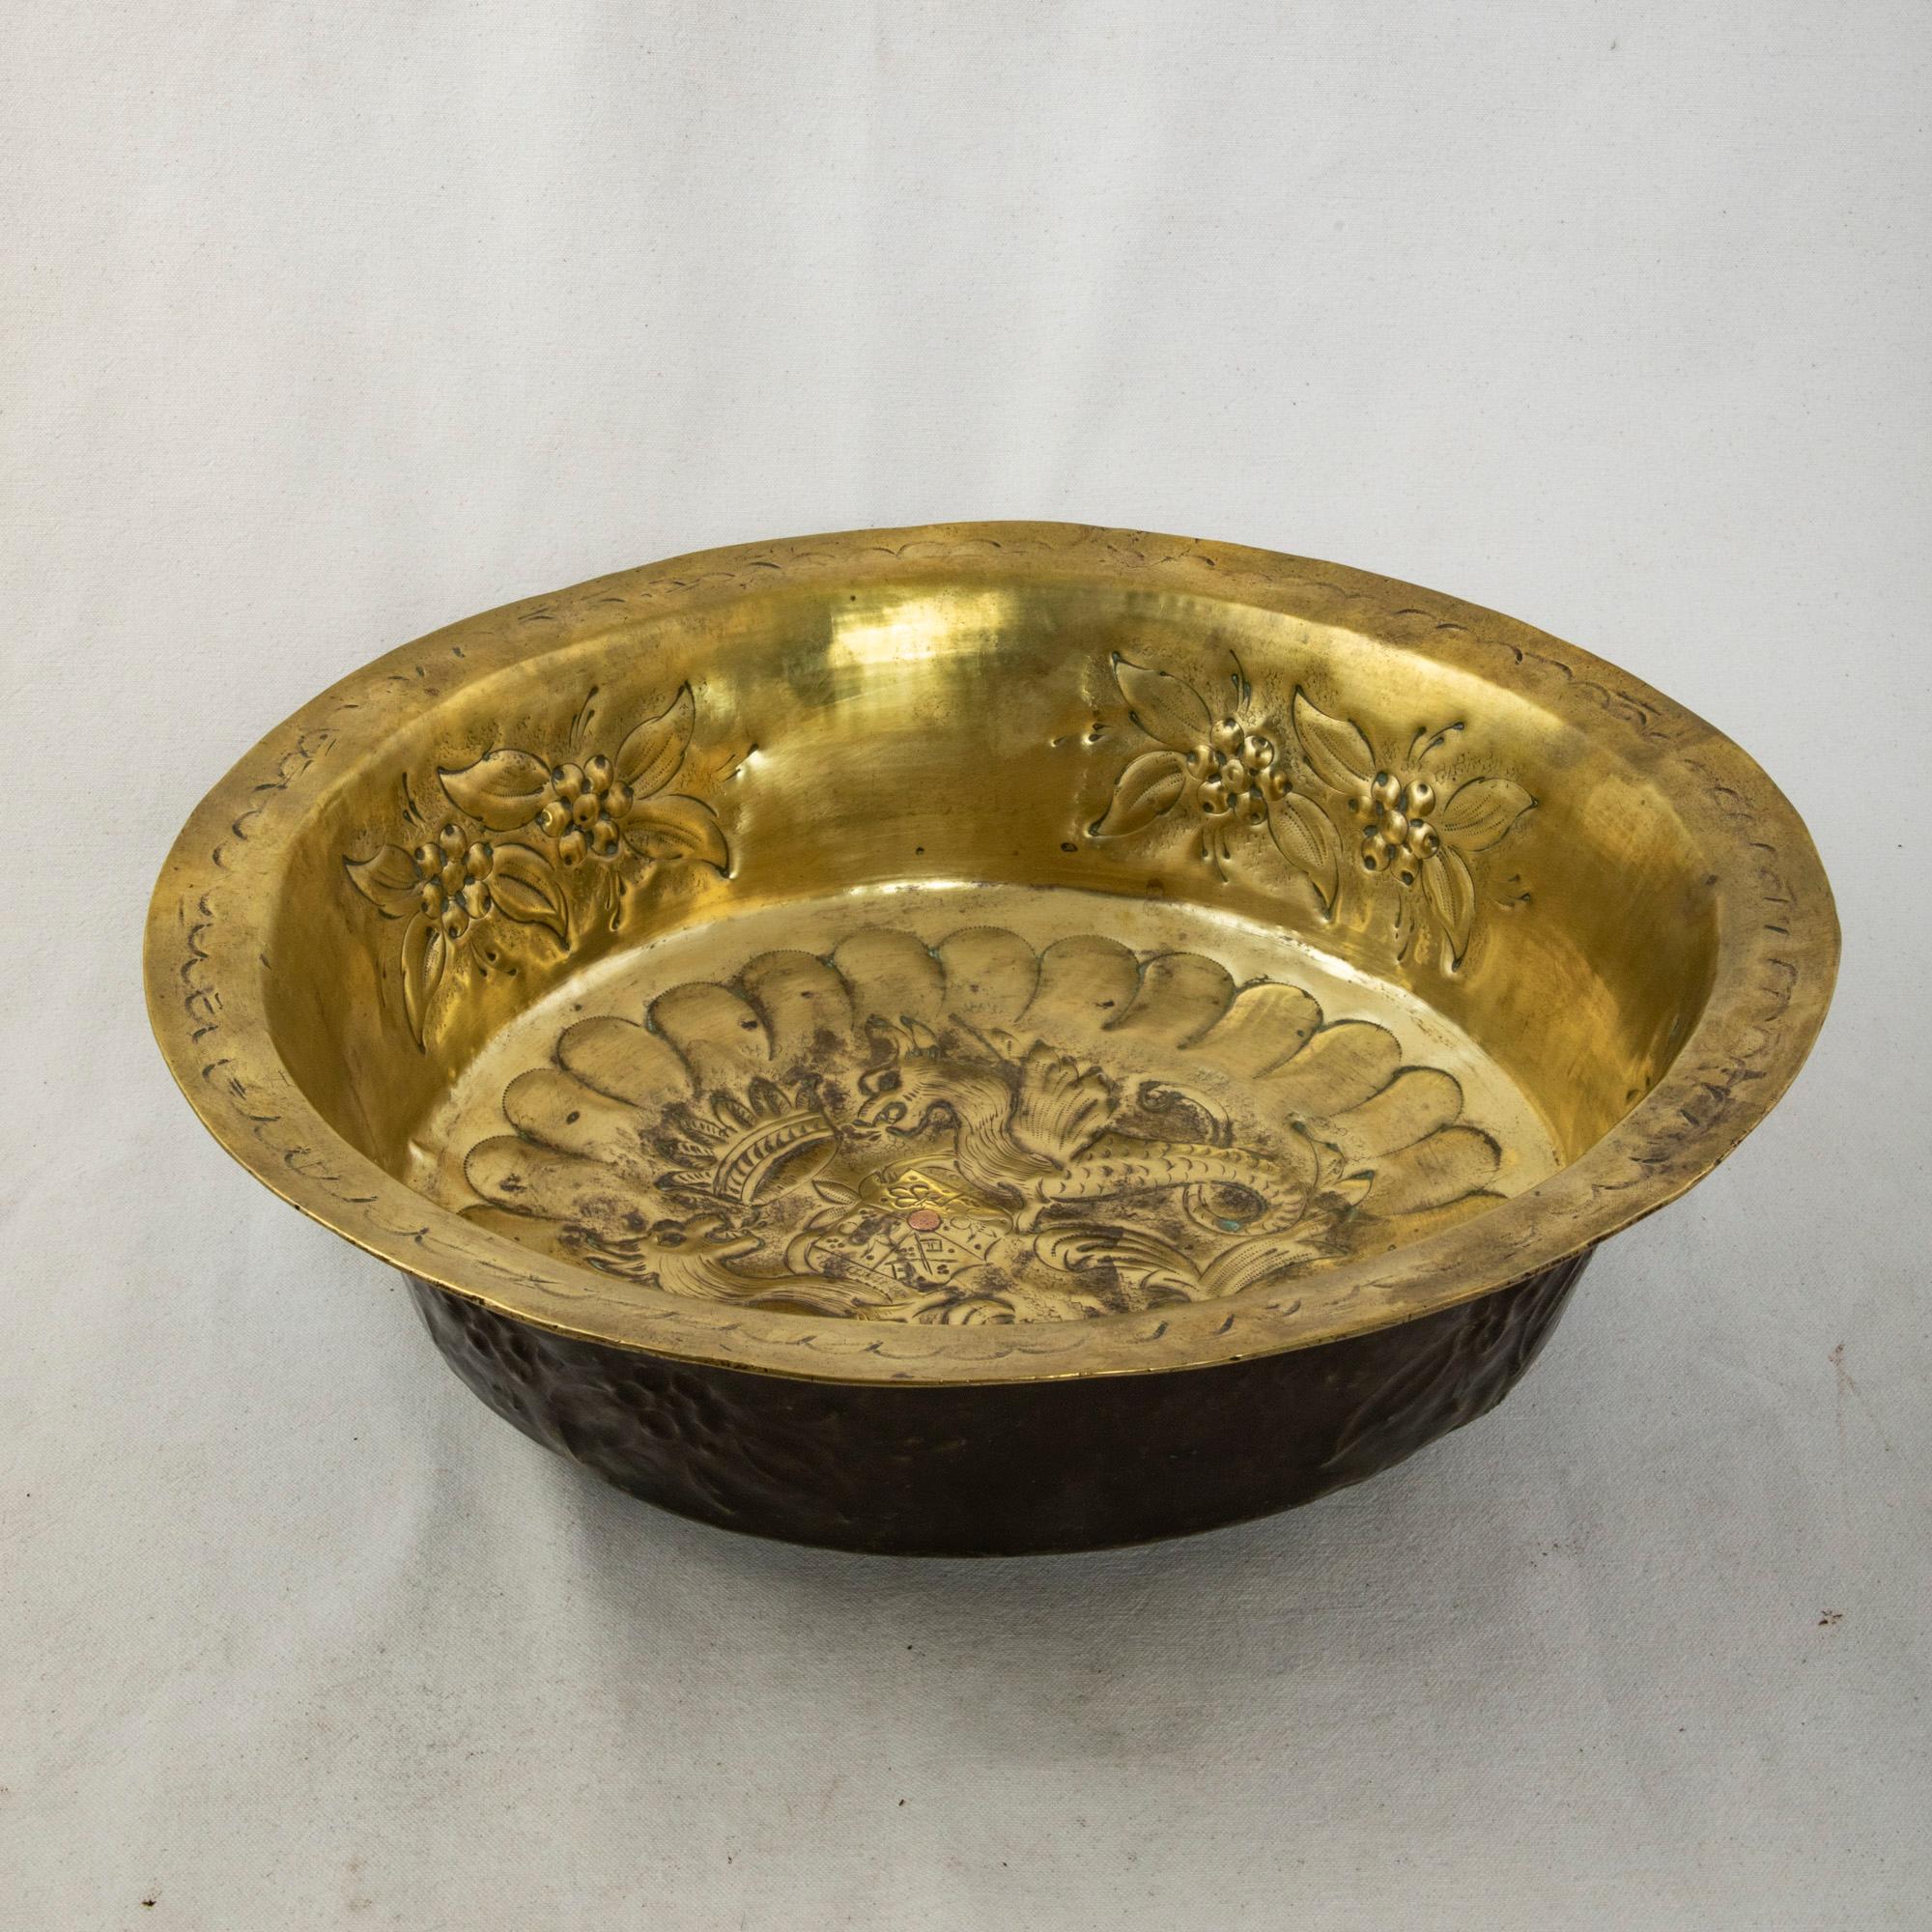 Originally used in a church as an offering plate, this mid-eighteenth century French brass repousse bowl features a coat of arms in the bottom displaying the fleur de lys of France and the ermine of Brittany. A crown rests above the coat of arms,